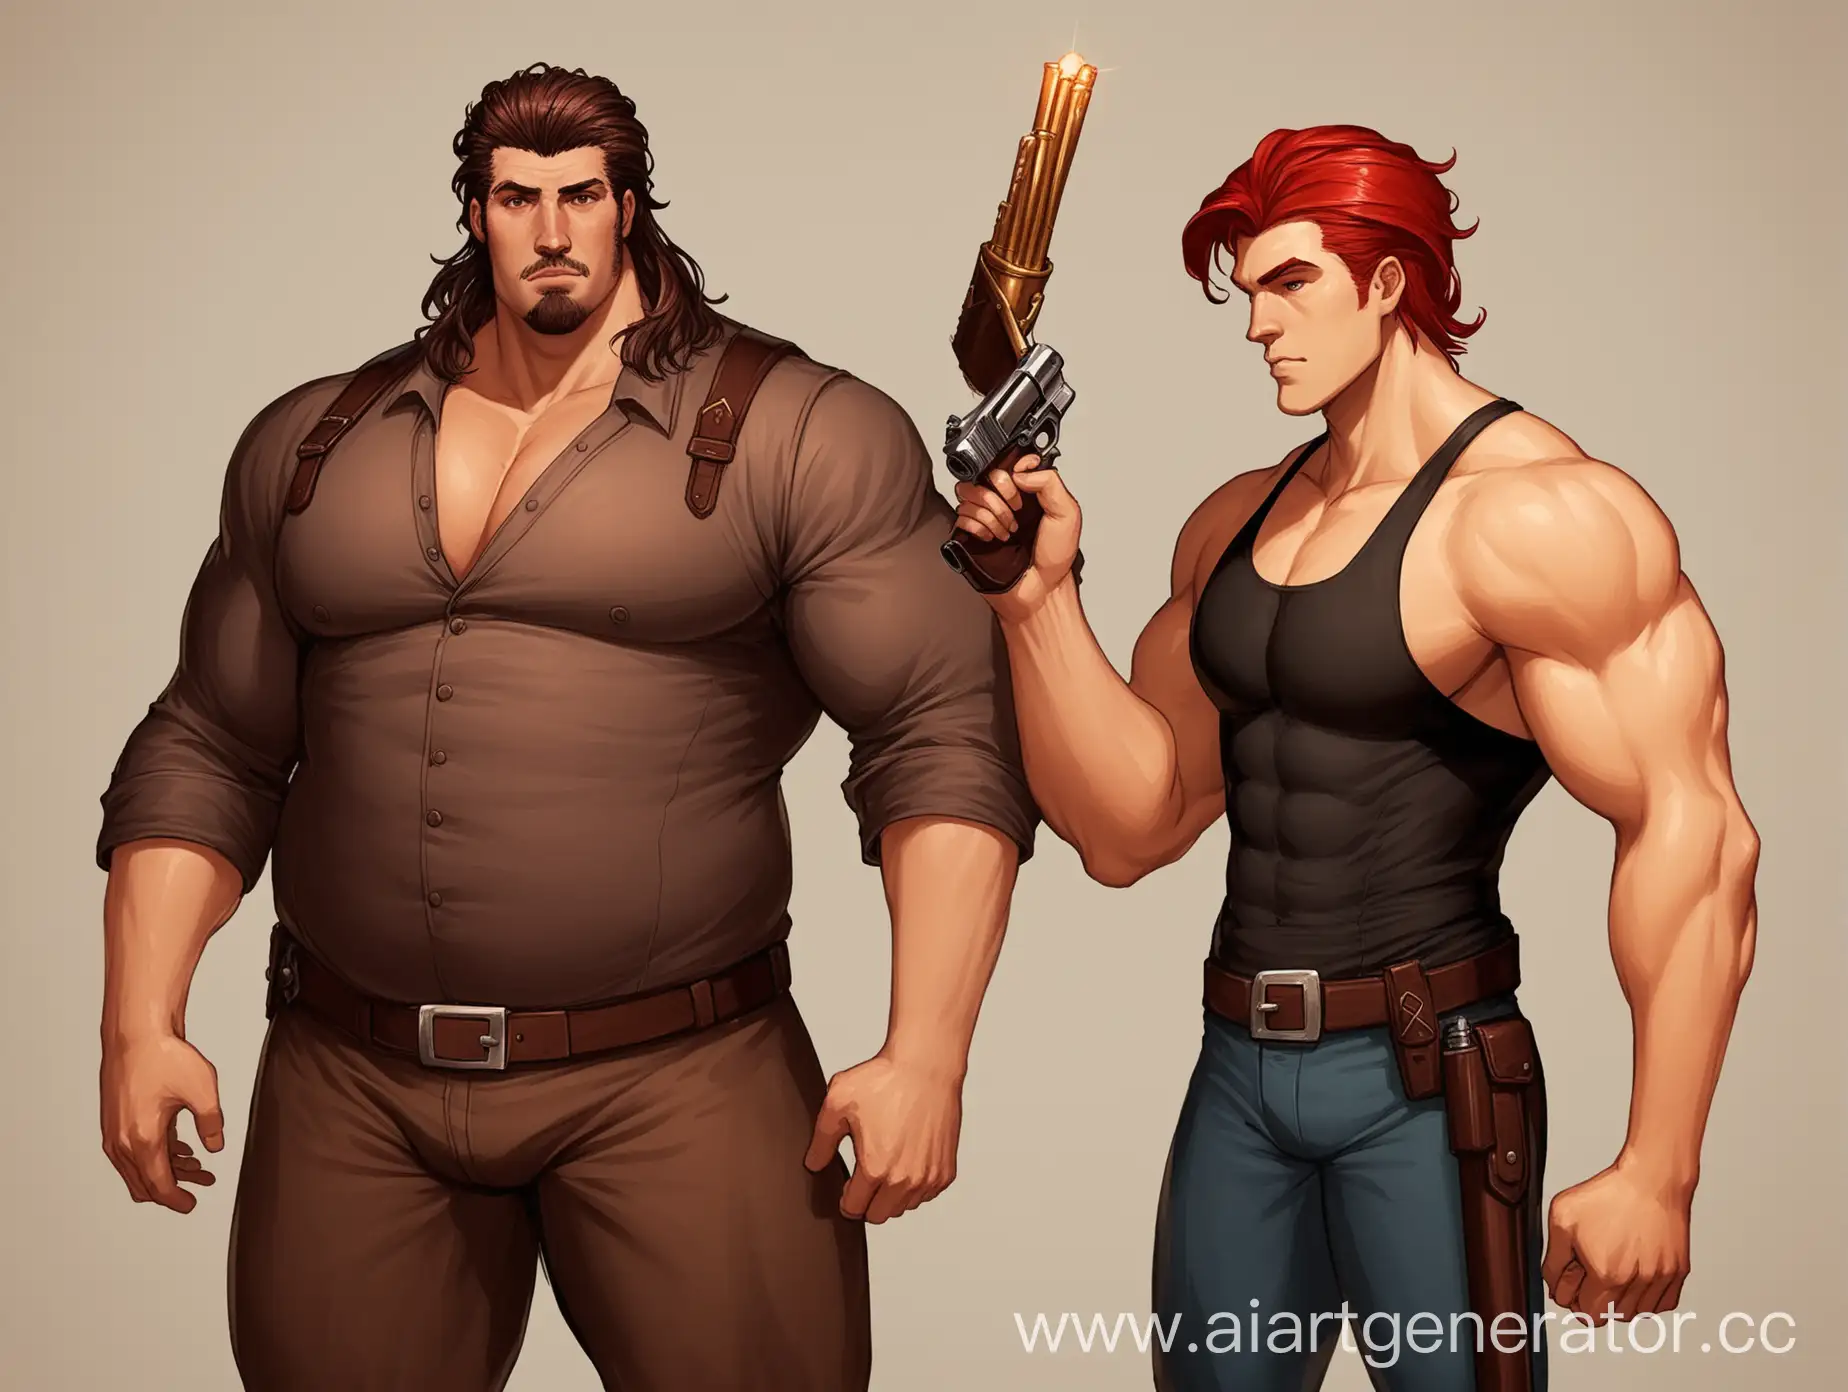 Tall-Brunette-with-Baton-and-Pistol-Stands-Beside-Beefy-Redhead